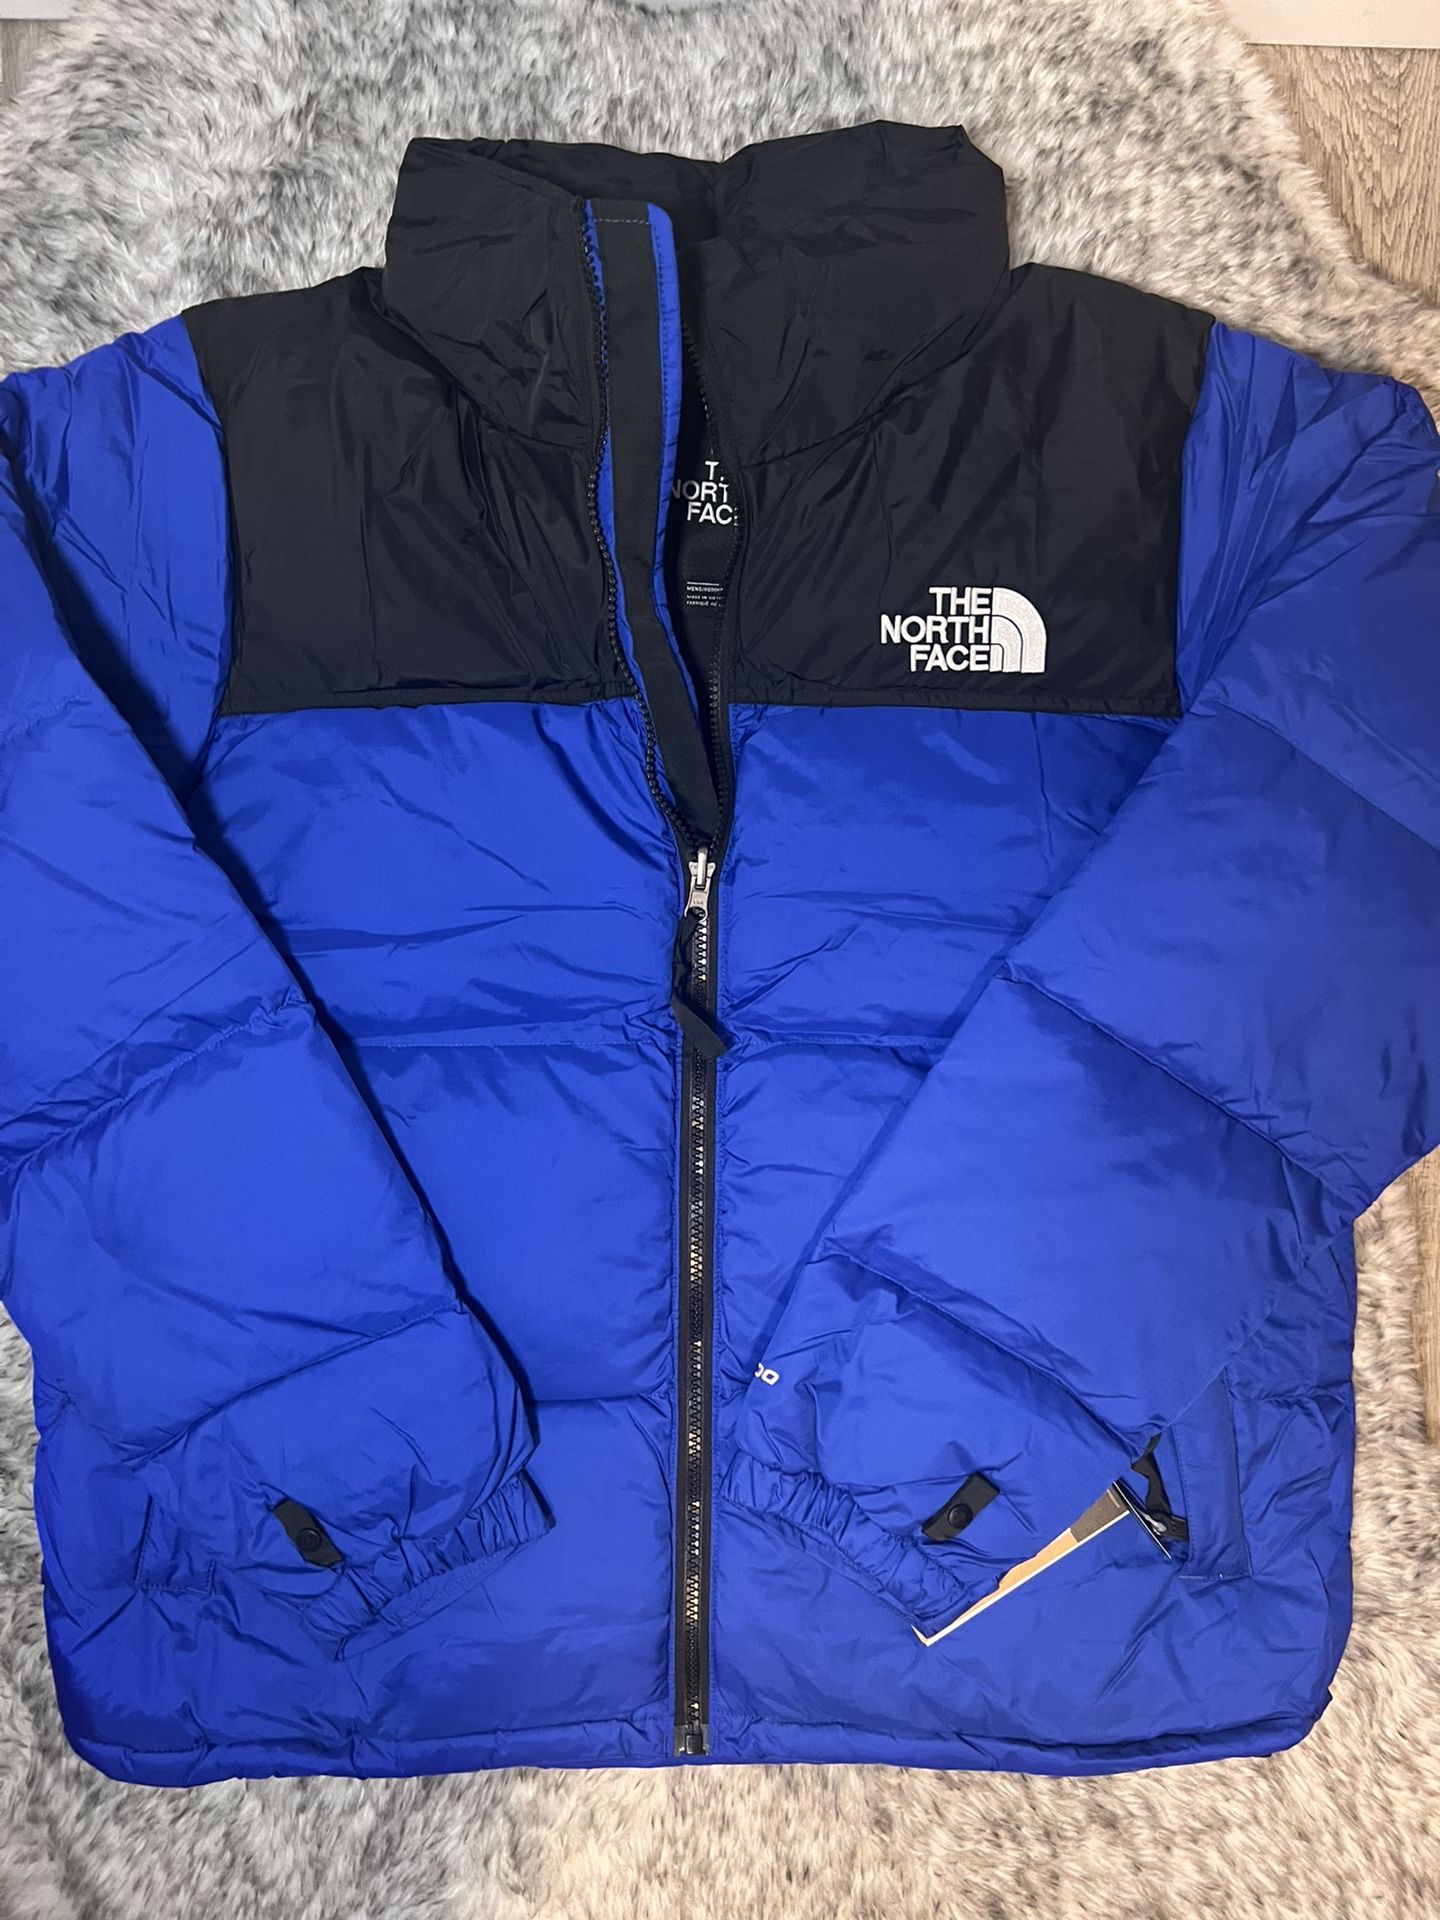 The North Face 700 Nuptse Puffer - Size XL